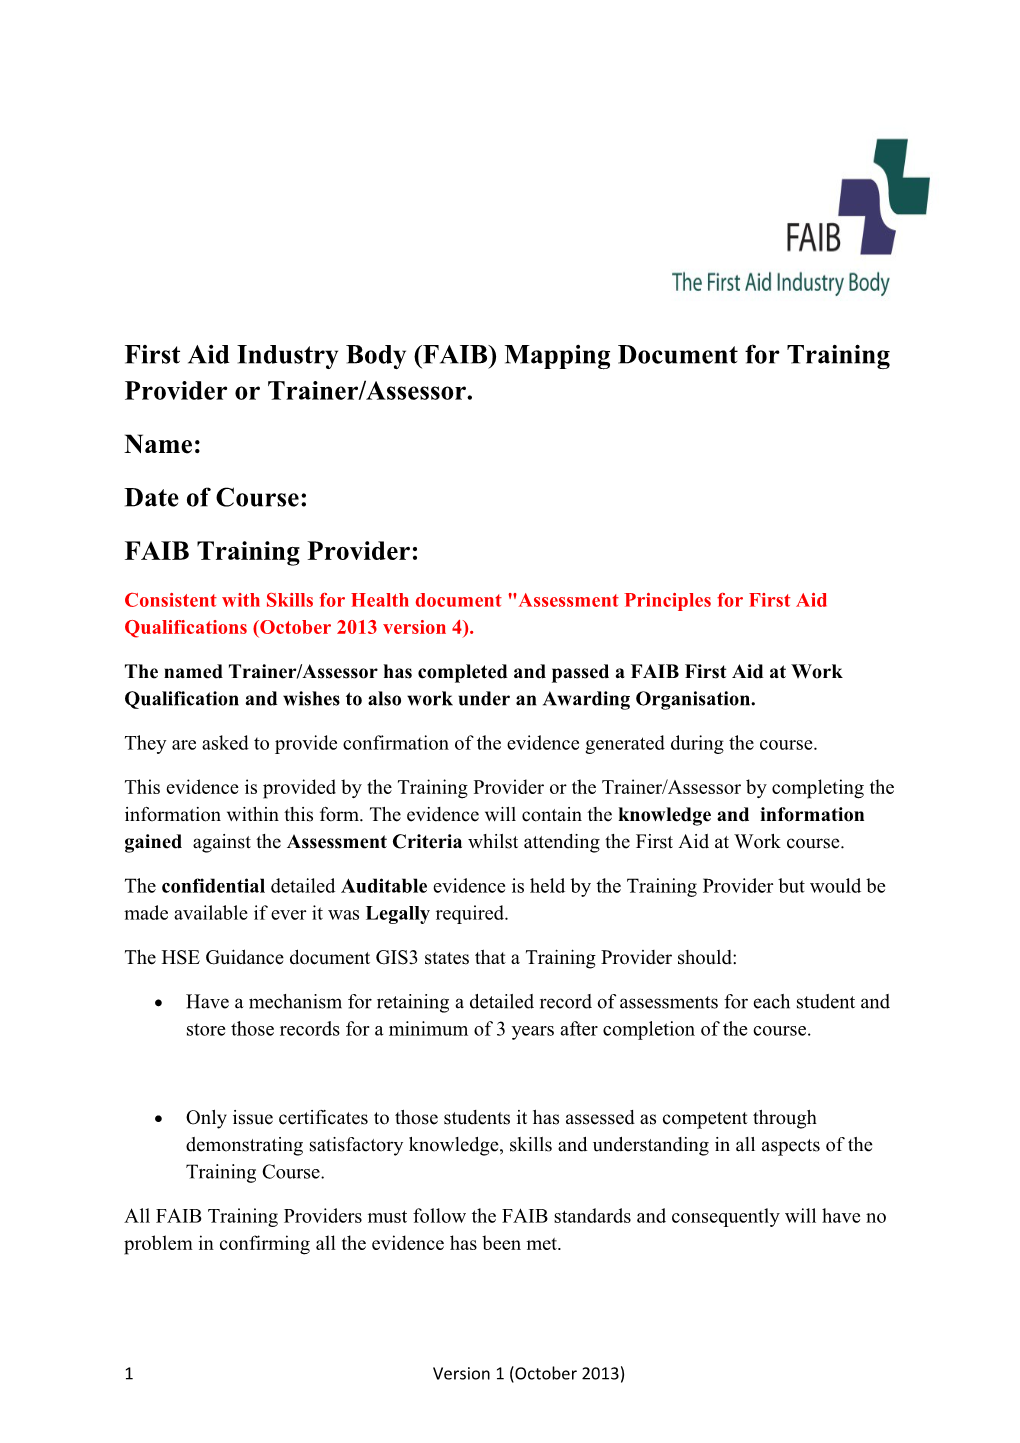 First Aid Industry Body (FAIB) Mapping Document for Training Provider Or Trainer/Assessor